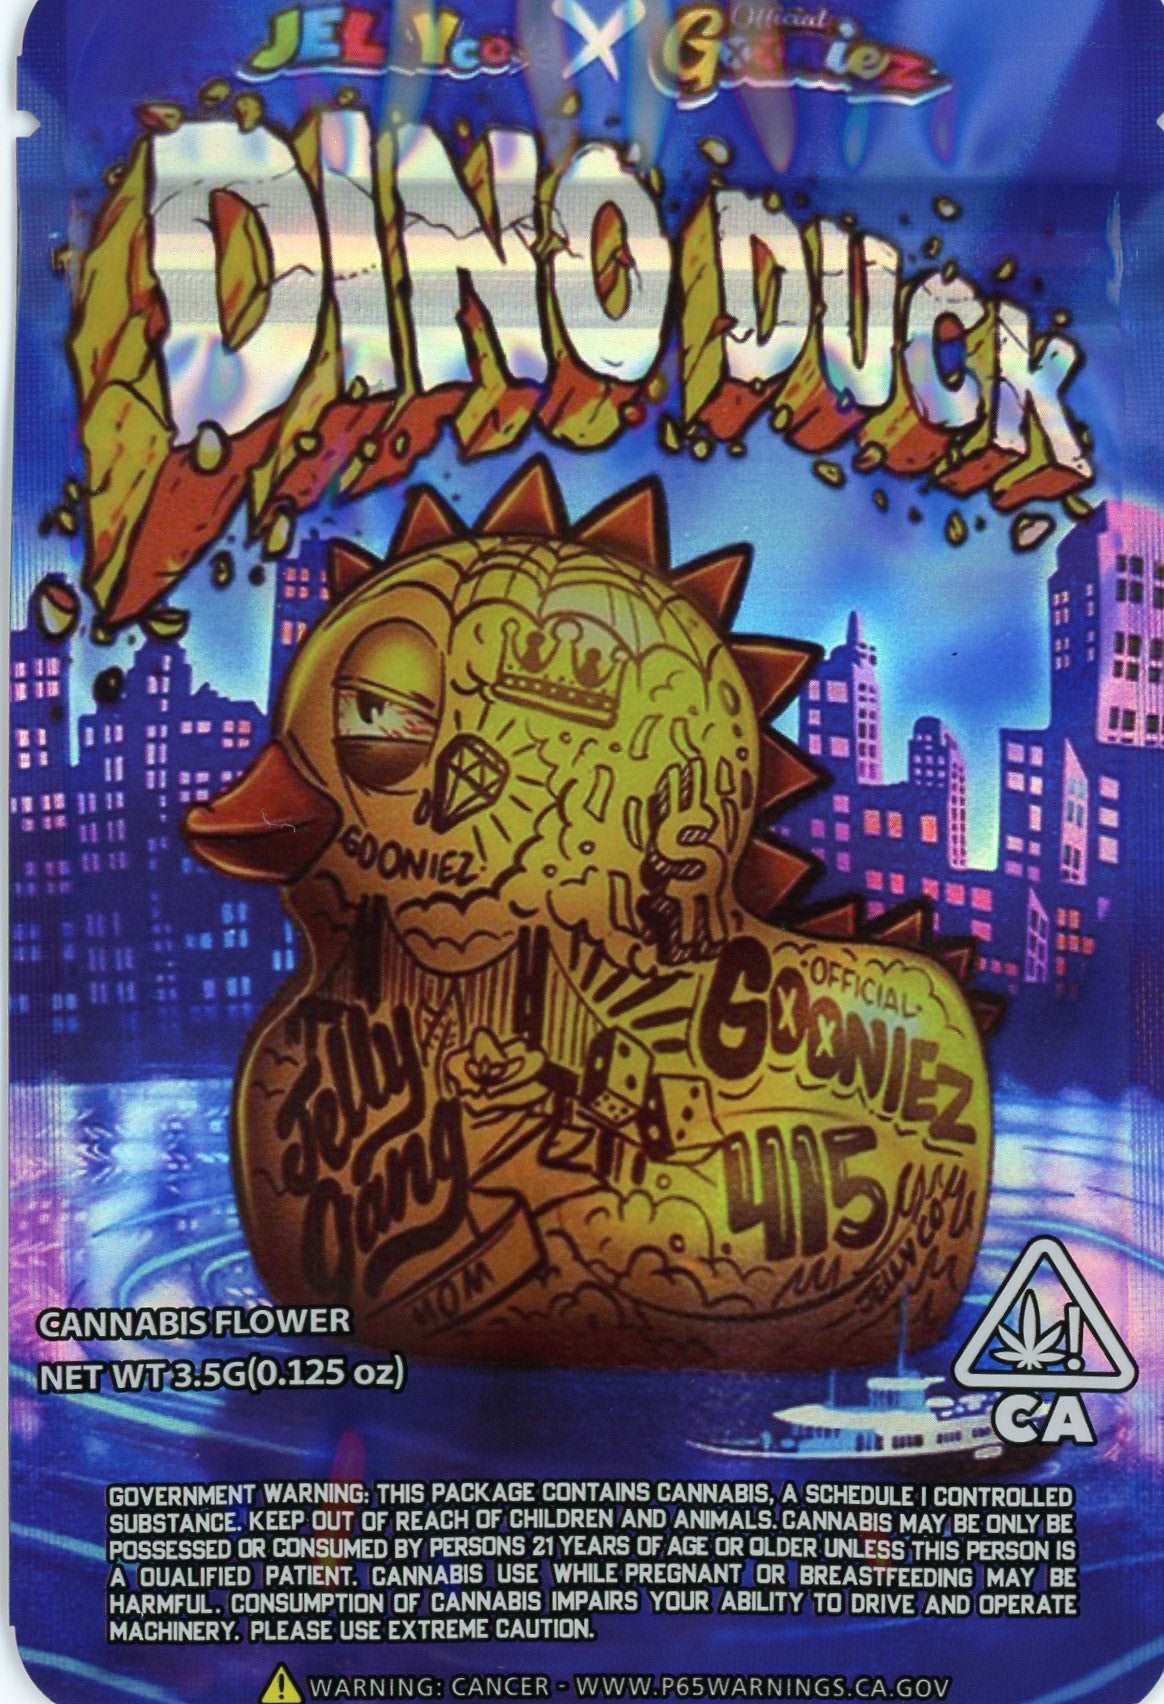 Dino Duck Mylar Bags 3.5g Grams Gooniez Teds Budz Jelly Co. HOLOGRAPHIC MYLAR BAG, MYLAR BAG WITH SPOT UV EFFECTS, MYLAR BAG WITH PRINTED GUSSET back